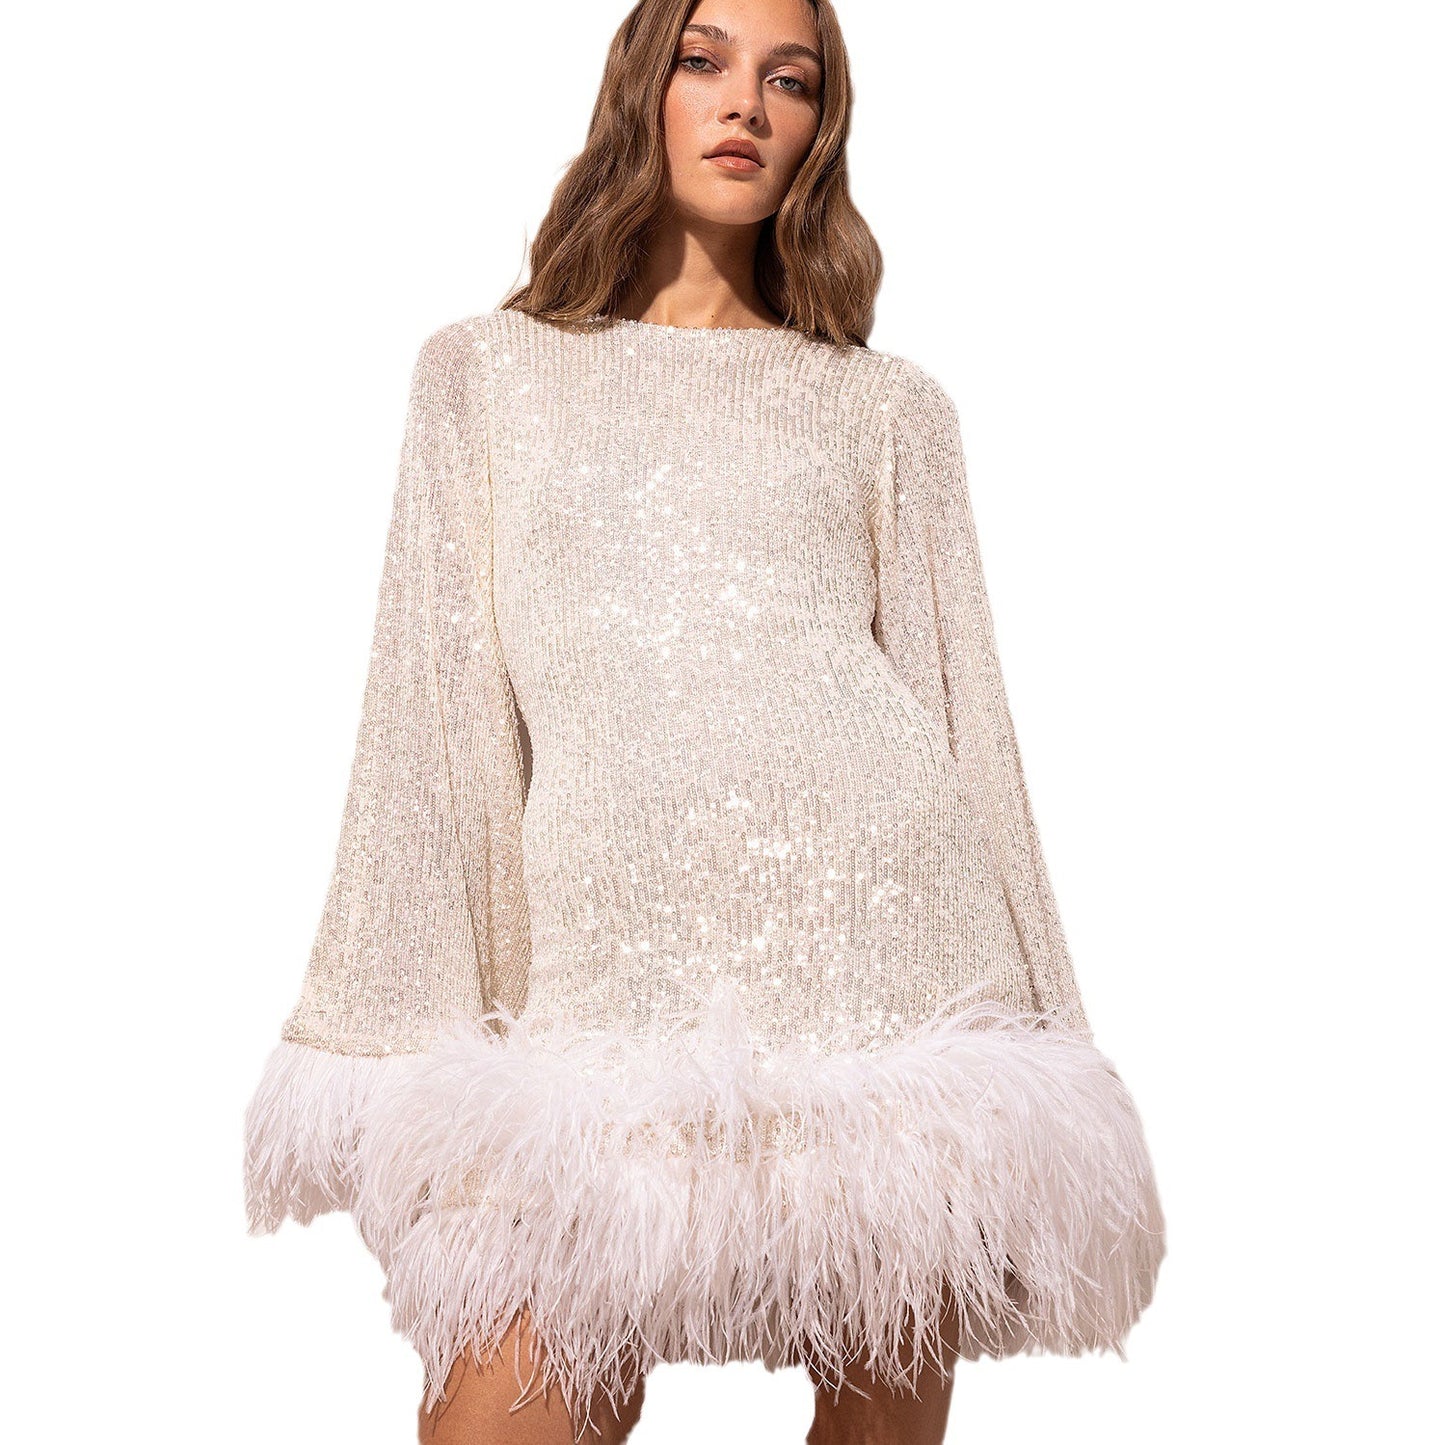 Waist length sexy short skirt dress with large backless long sleeved sequin feather dress